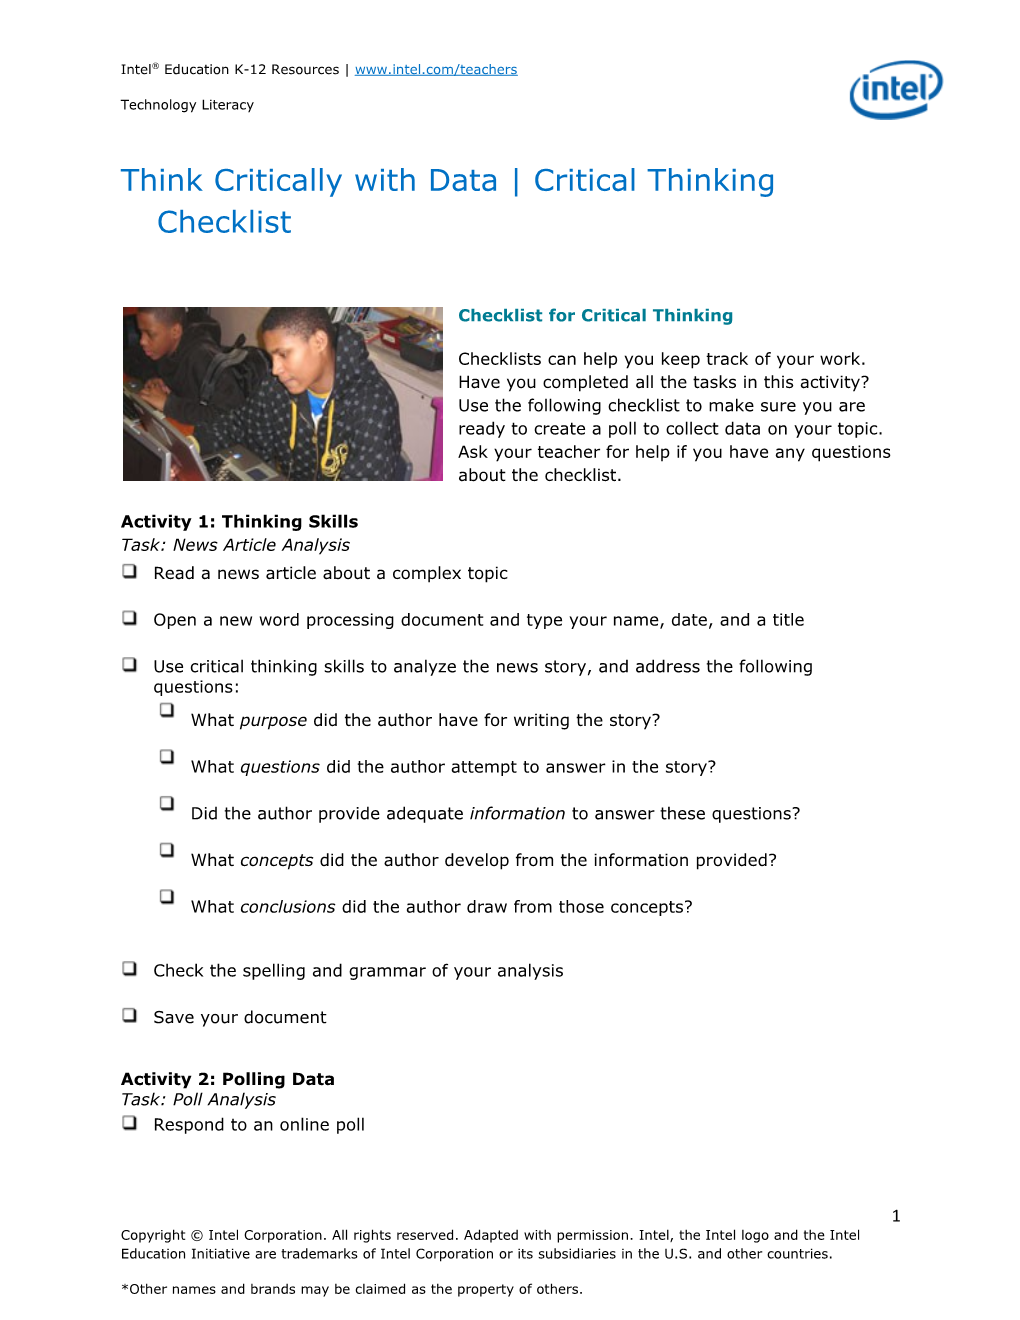 Think Critically with Data Critical Thinking Checklist